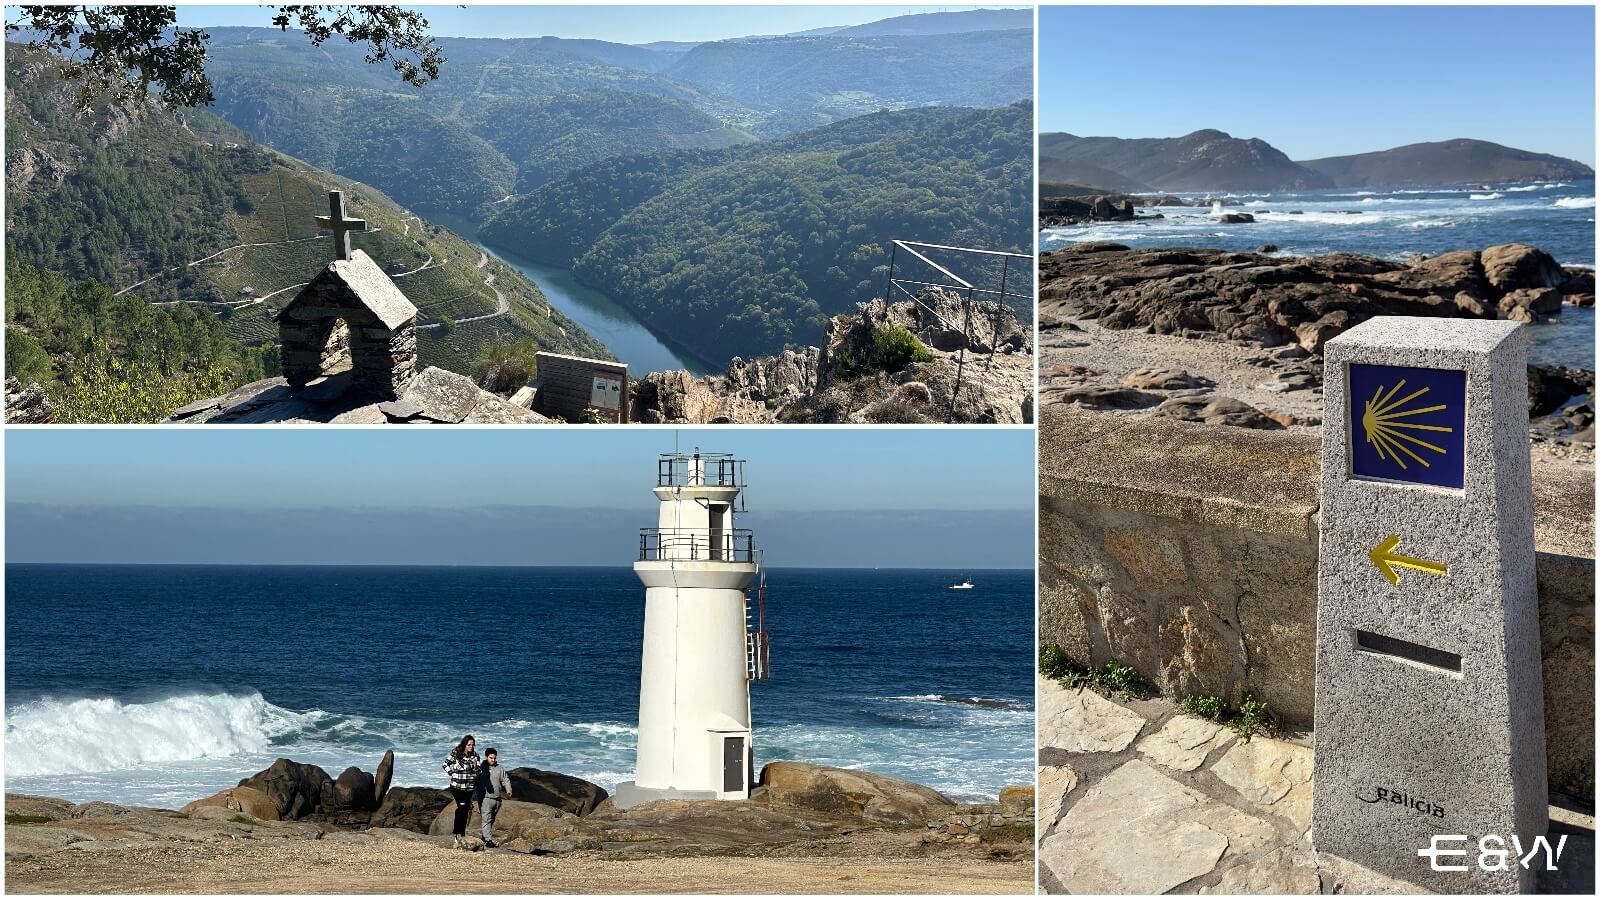 What to do in Galicia? Our top plans - Hiking in Ribeira Sacra and Costa da Morte